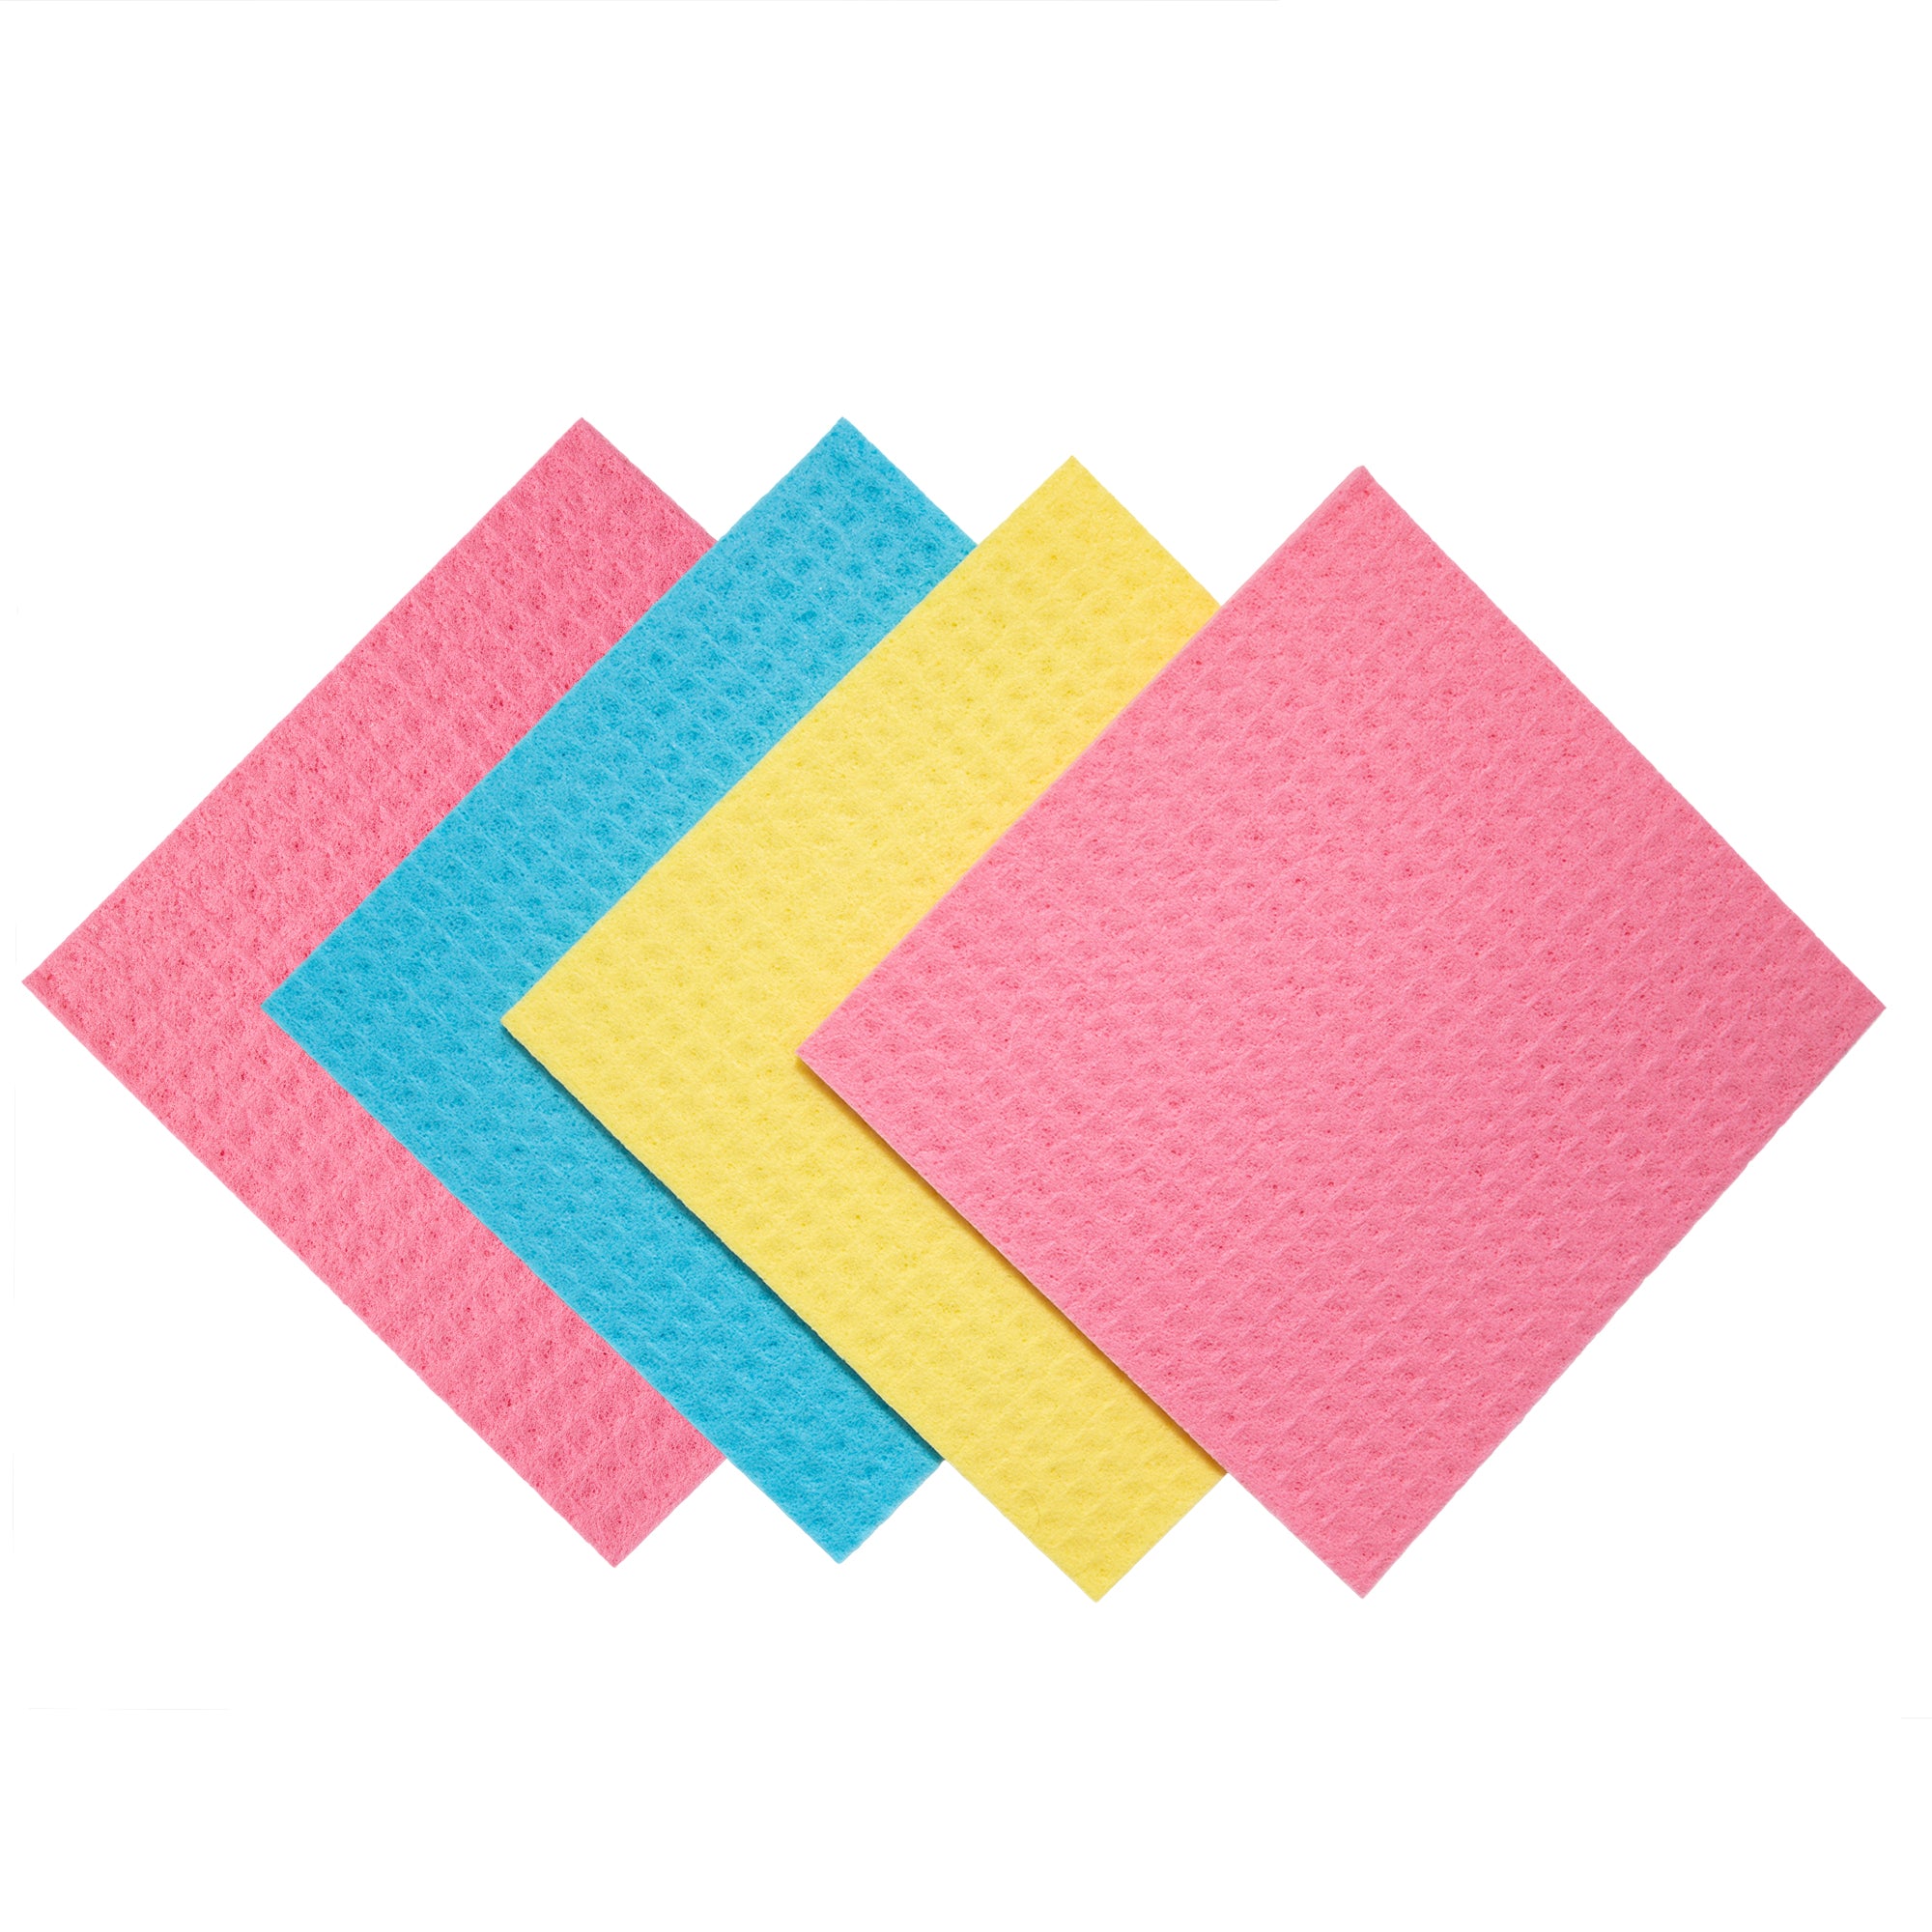 PaperlessKitchen Eco-friendly Kitchen Cleaning Sponge Cloths | Reusable  Multi-color Cellulose Dish Cloths | Super-absorbent and Odorless Cleaning